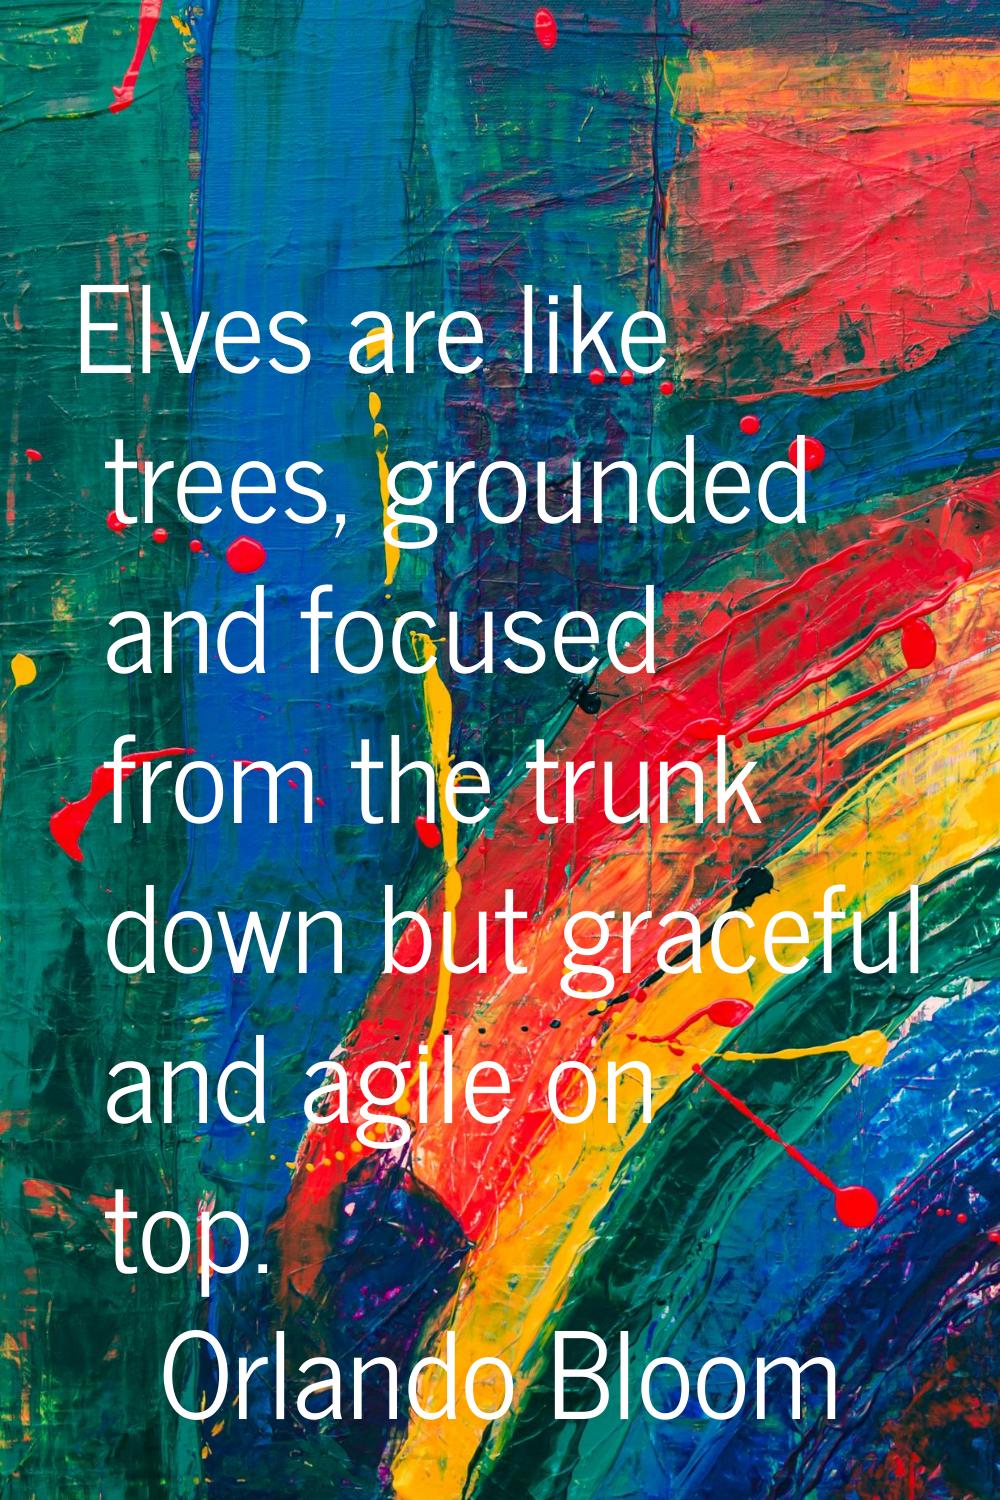 Elves are like trees, grounded and focused from the trunk down but graceful and agile on top.